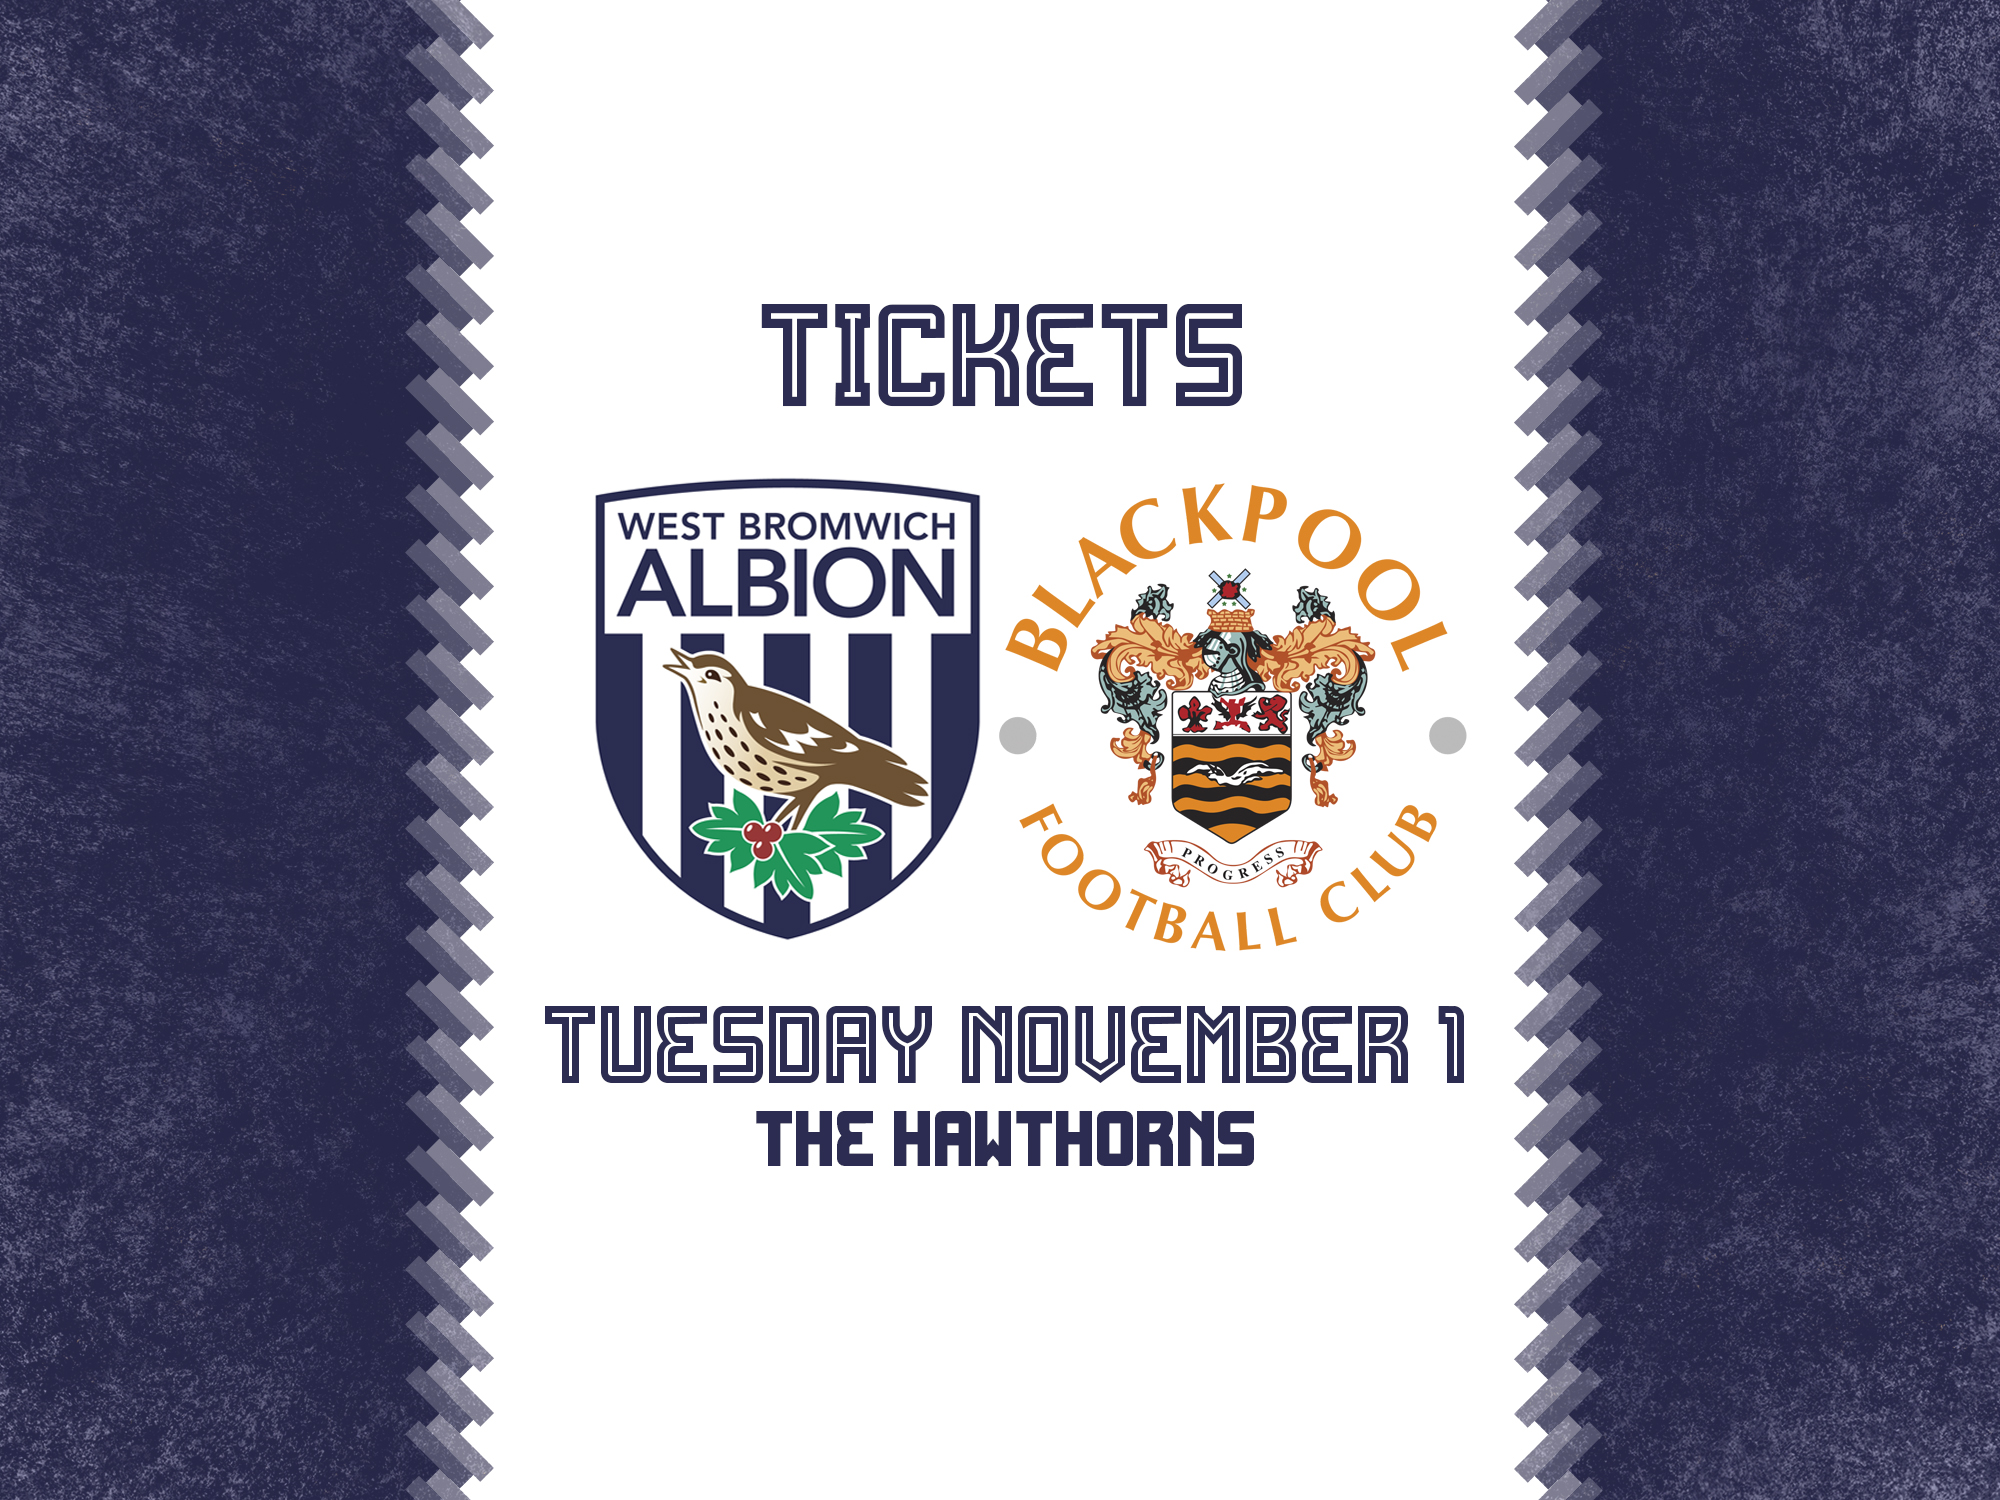 A graphic showing the badges of West Bromwich Albion and Blackpool and the date they will play each other (November 1, 2022 at The Hawthorns)